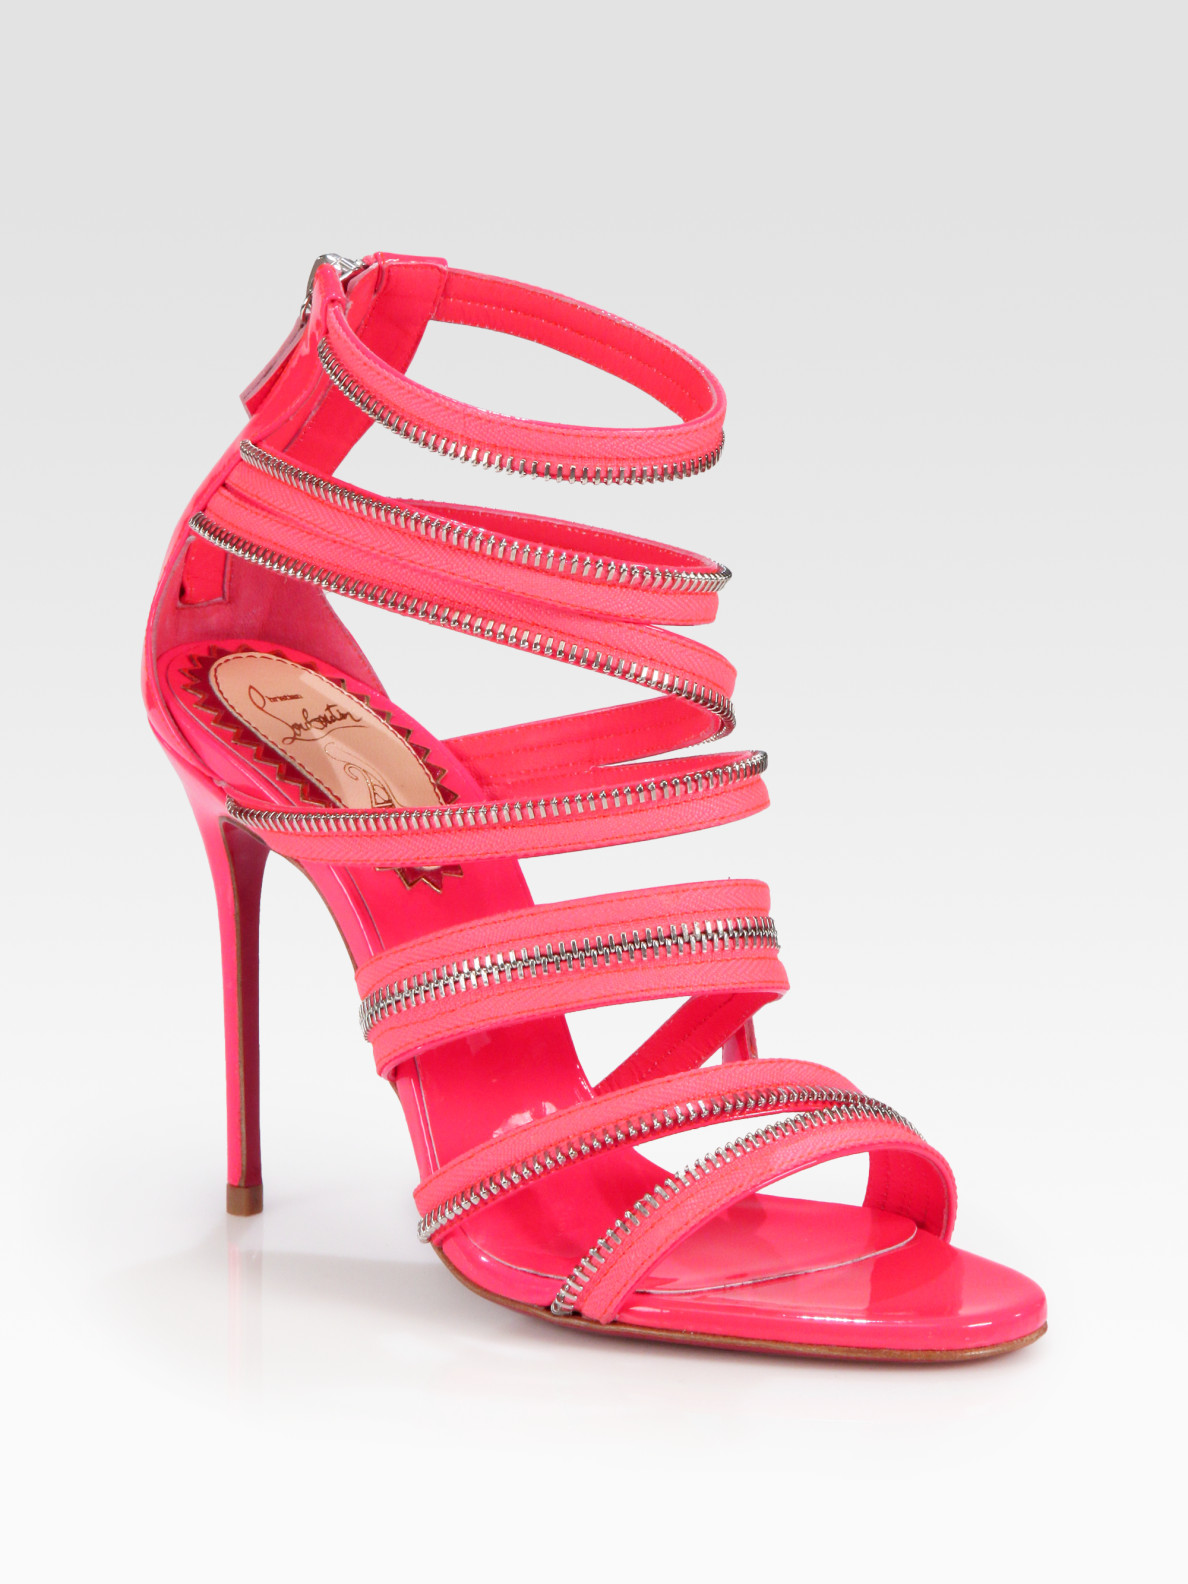 Lyst - Christian louboutin Unzip Patent Leather Sandals in Pink